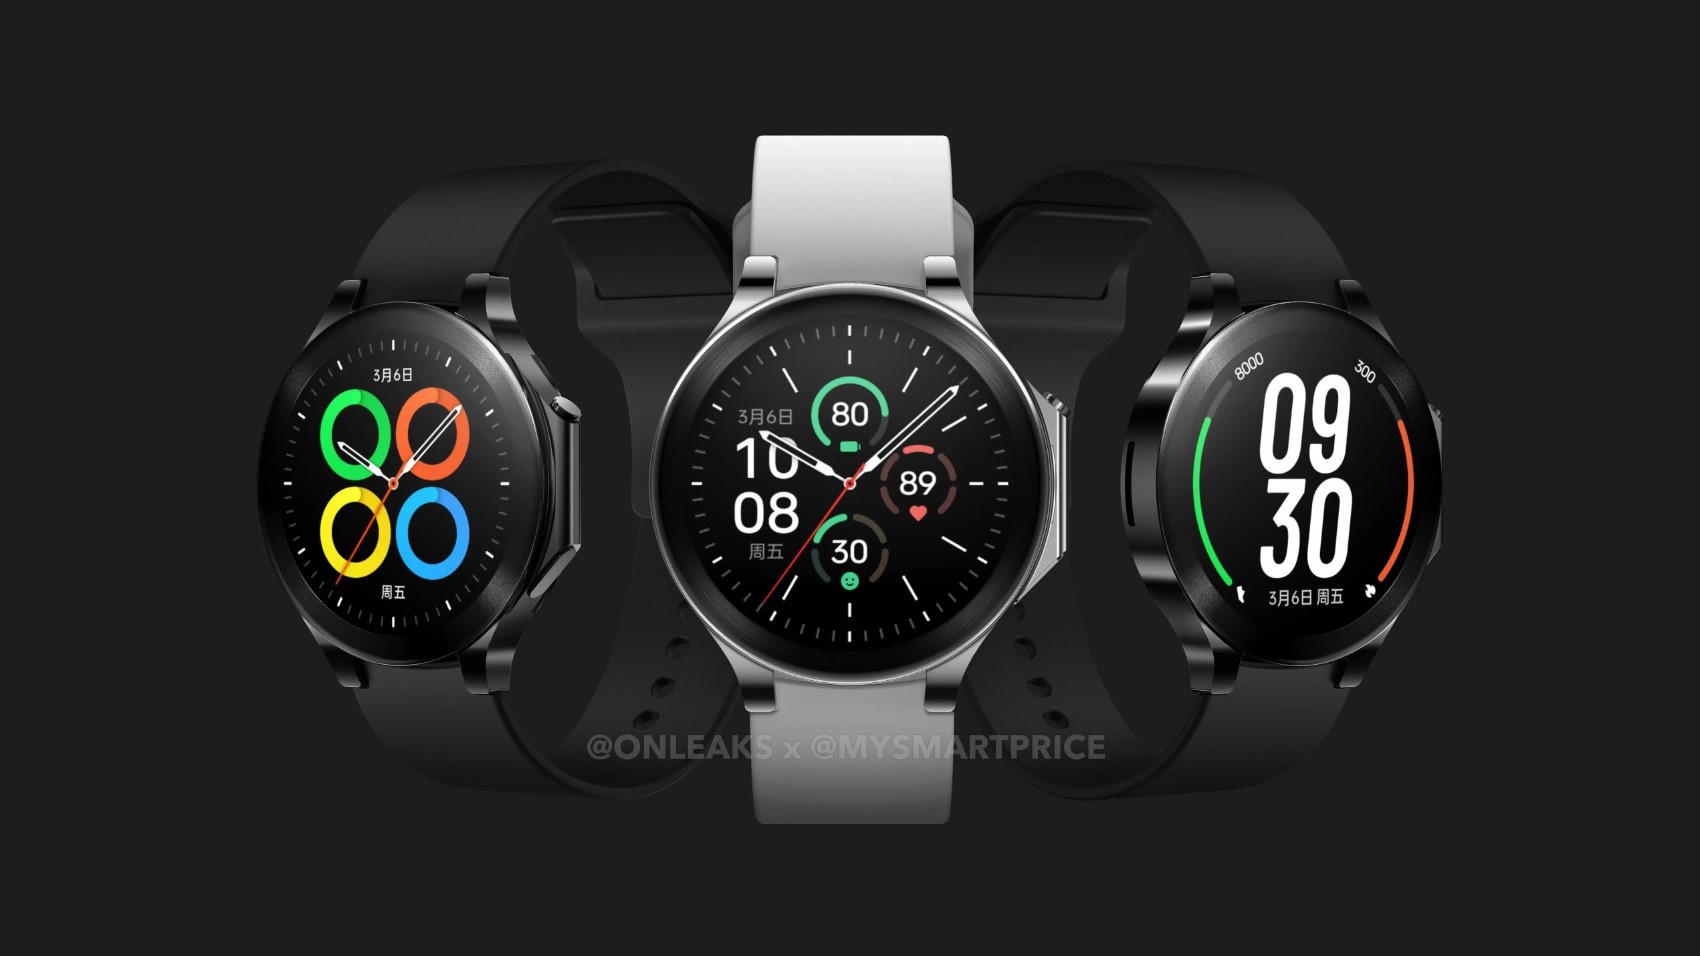 A leaked render based on the prototype version of the OnePlus Watch 2 in black and white.